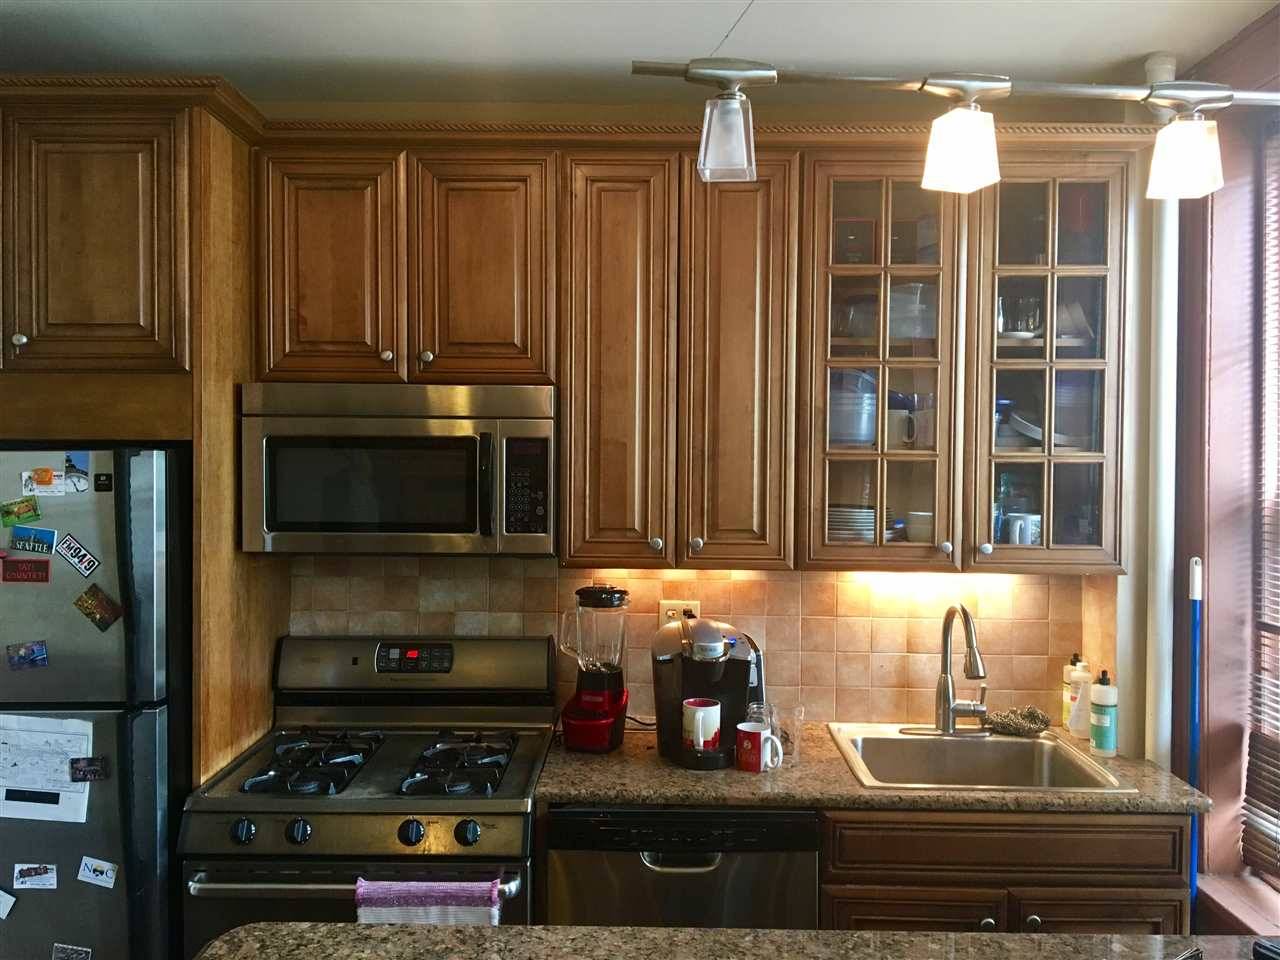 Kitchen has granite counters and breakfast bar - New Jersey